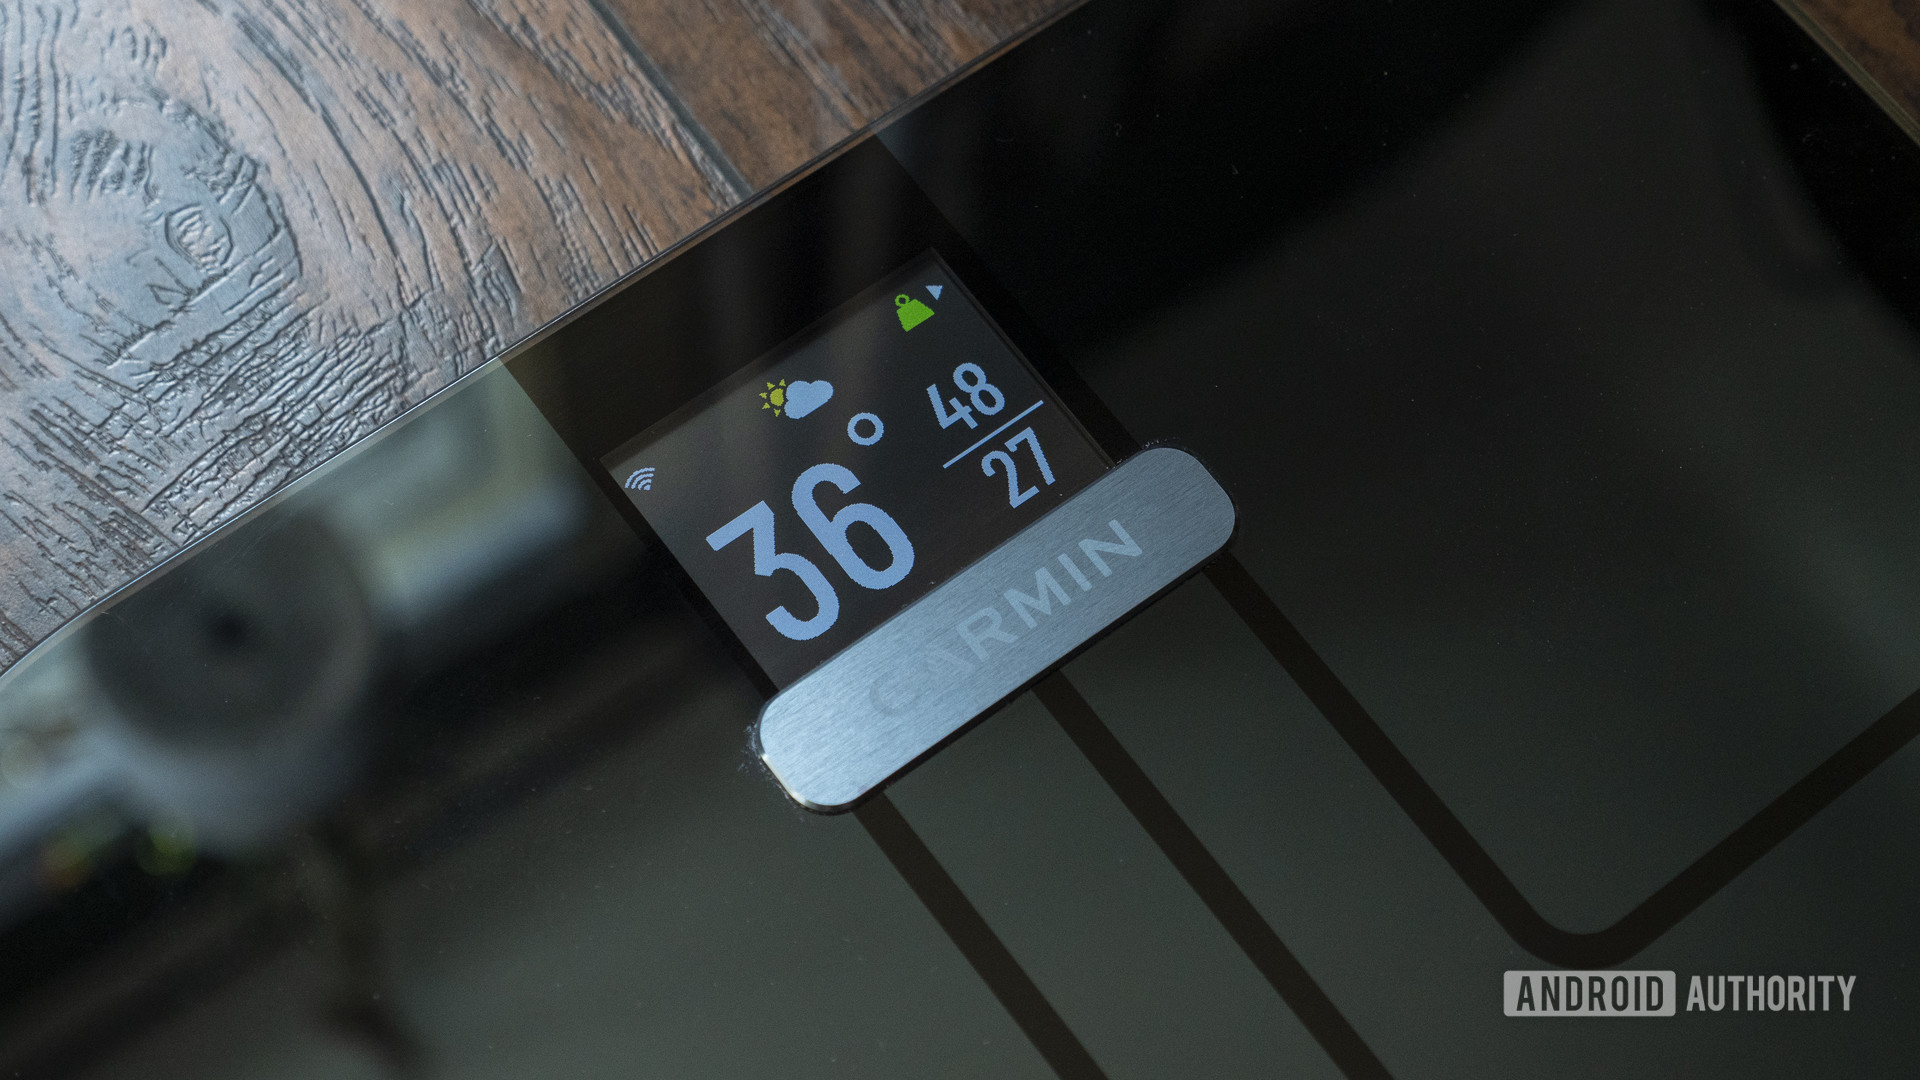 garmin index s2 smart scale review weather